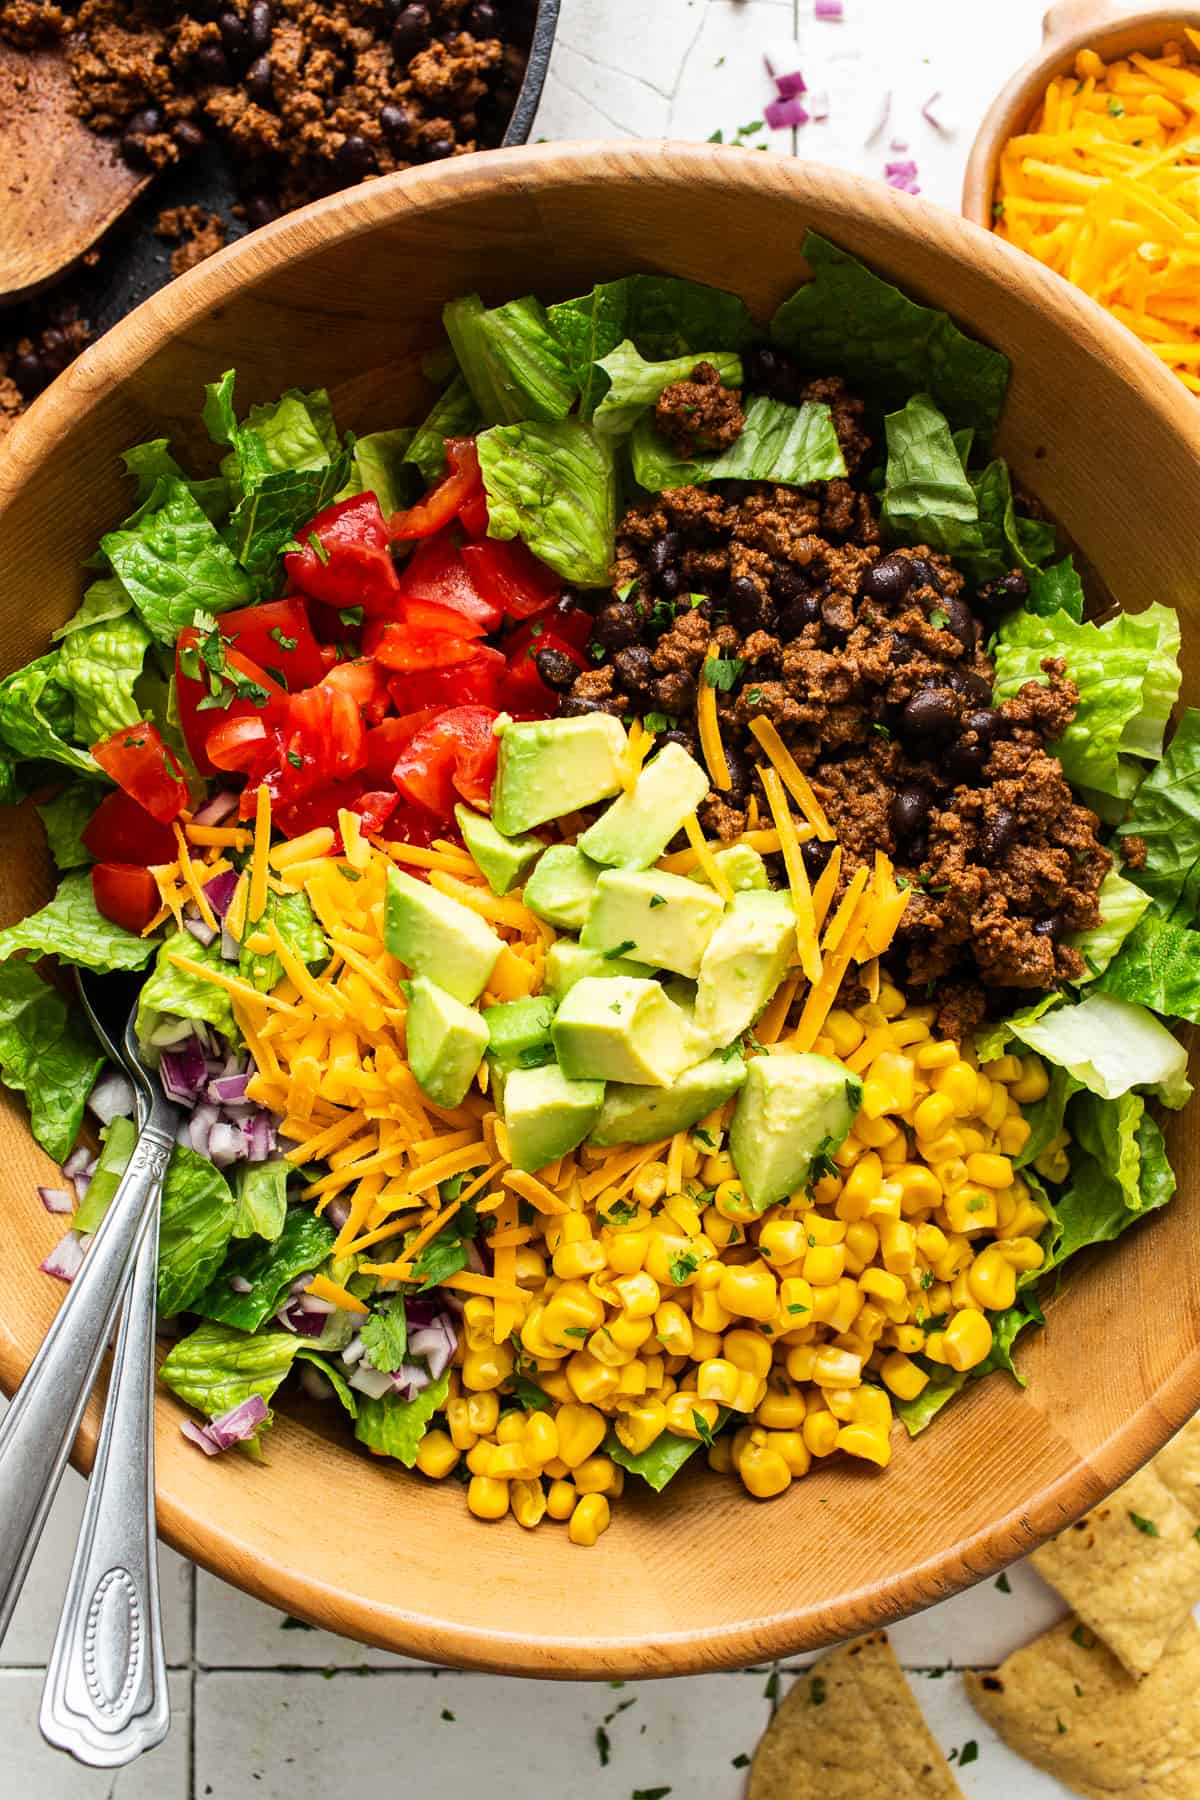 A large bowl filled with shredded lettuce, diced tomatoes, ground beef, black beans, corn, diced red onion, shredded cheese, and diced avocado.